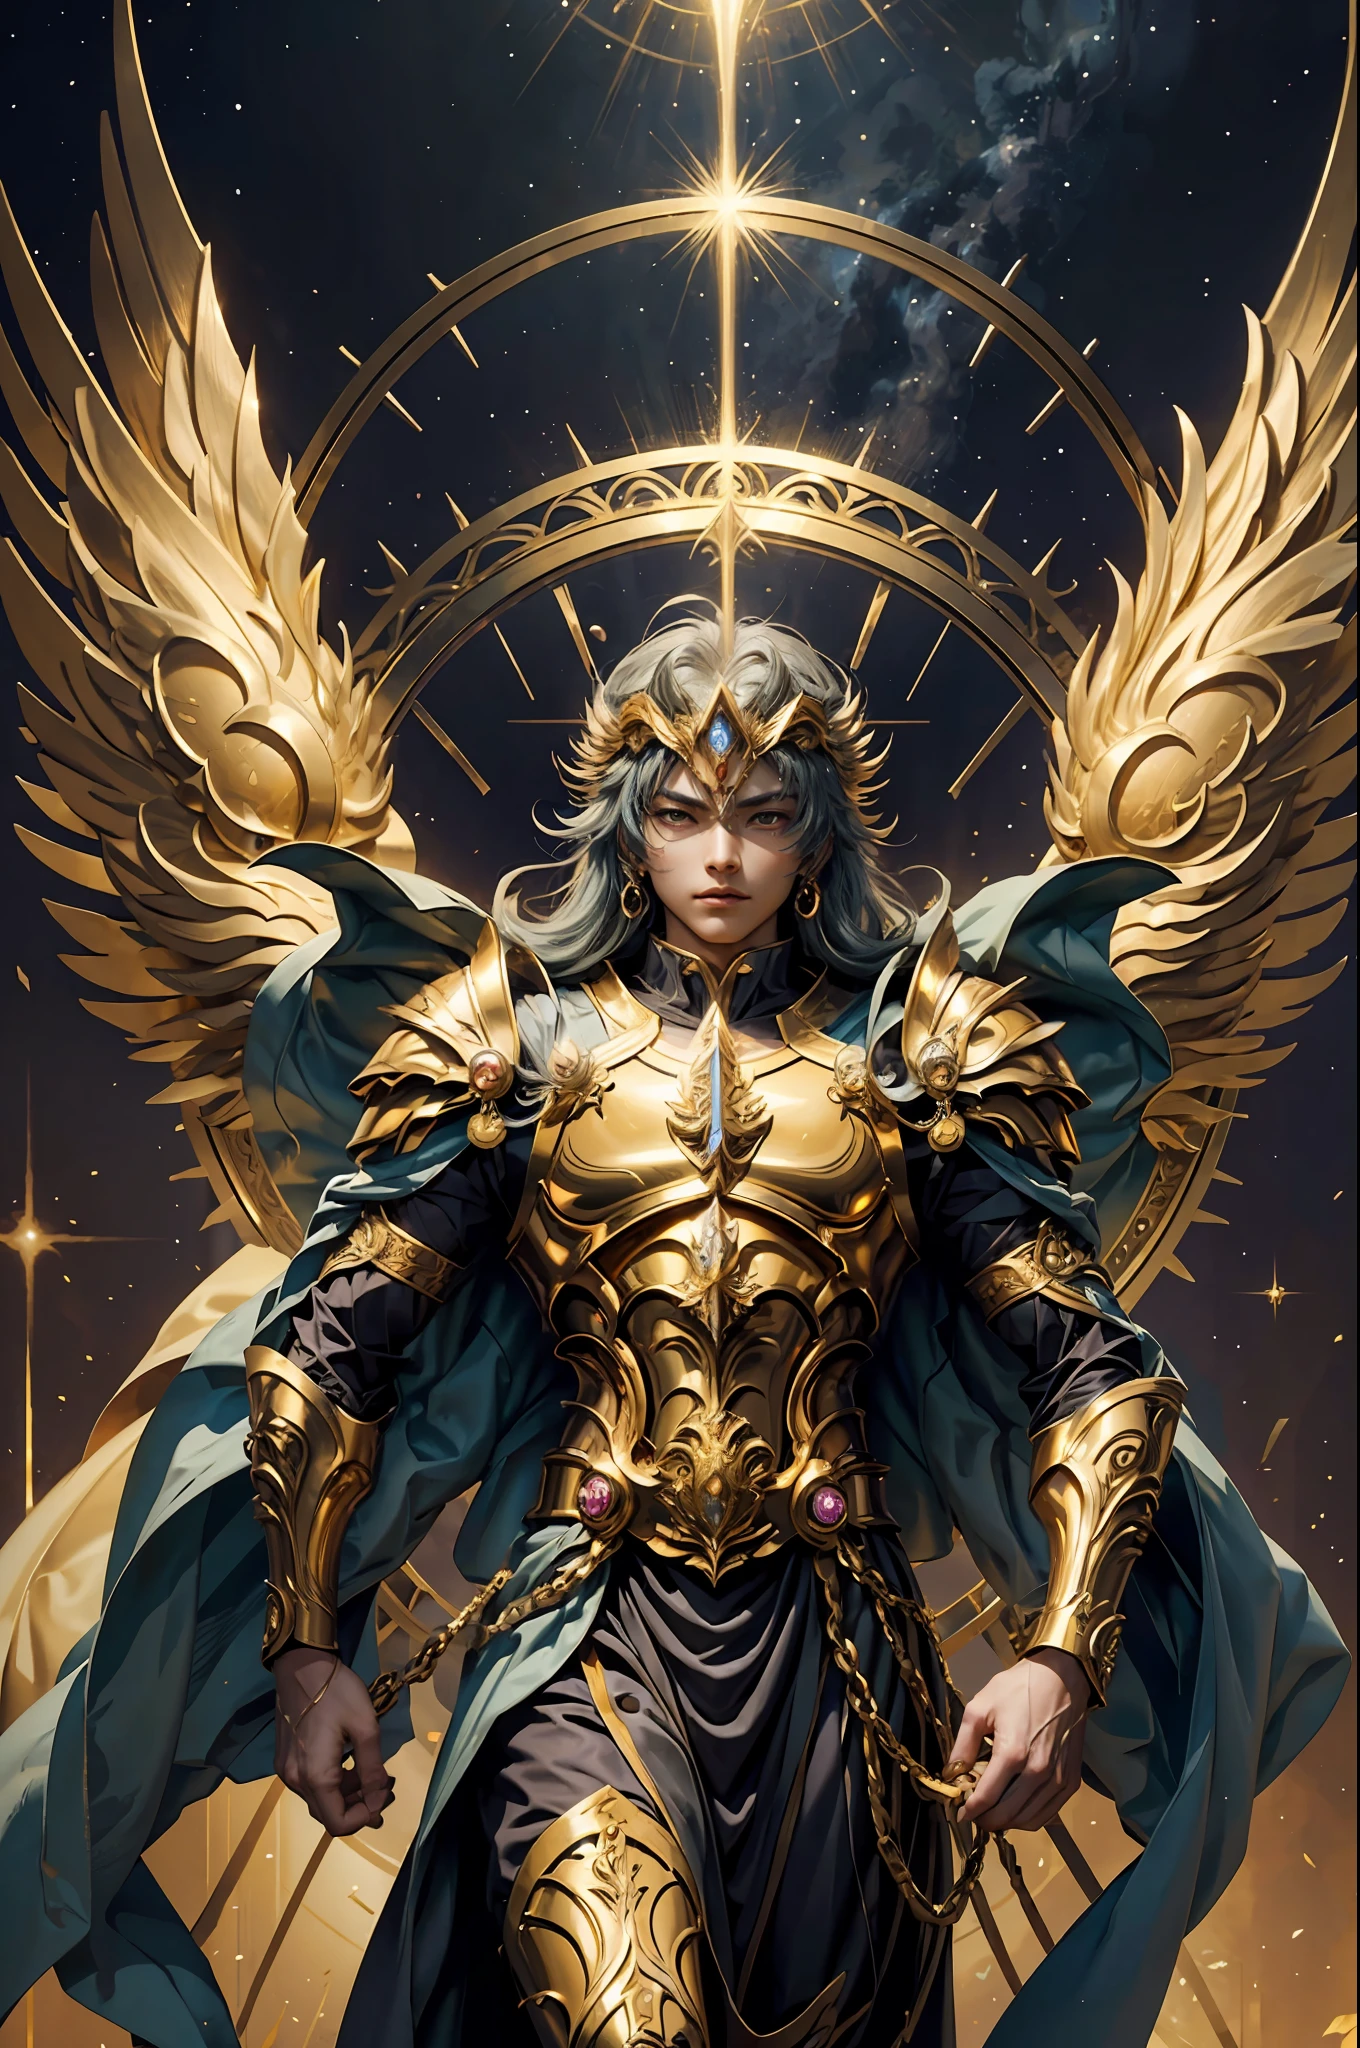 In the mysterious world of the Holy Domain，We saw the Leo Saint Seiya in the Golden Saint Seiya。He wears a golden robe of Leo，Exudes endless power and dignity。The vestment is carved with the motif of Leo，Shimmering with dazzling golden light，Symbolizes the nobility and courage of this Saint Seiya。

At his side is a solemn and powerful lion，It is a loyal guardian of Leo。The lion and Saint Seiya rely on each other，It represents the courage and strength of Leo，Guarding the mission and domain of Saint Seiya。

And around them，Unveils a mysterious and magical golden Leo astrolabe。The astrolabe is painted with golden lions and other mysterious symbols，Exudes a magical and fascinating power。It represents the cosmic and astrological power of Leo，Echoing with the power of Saint Seiya。

The whole scene is imbued with Saint Seiya's masculinity and mysterious magical powers。Their presence makes people feel courageous、The power of power and protection，It also inspires people to pursue justice and move forward。

This image shows the heroic image of Leo in the Golden Saint Seiya，Complement the nobility and cosmic power it represents。It is the perfect combination of extraordinary power and mysterious world，Give people courage and inspiration，Let them believe in the power of justice and power。